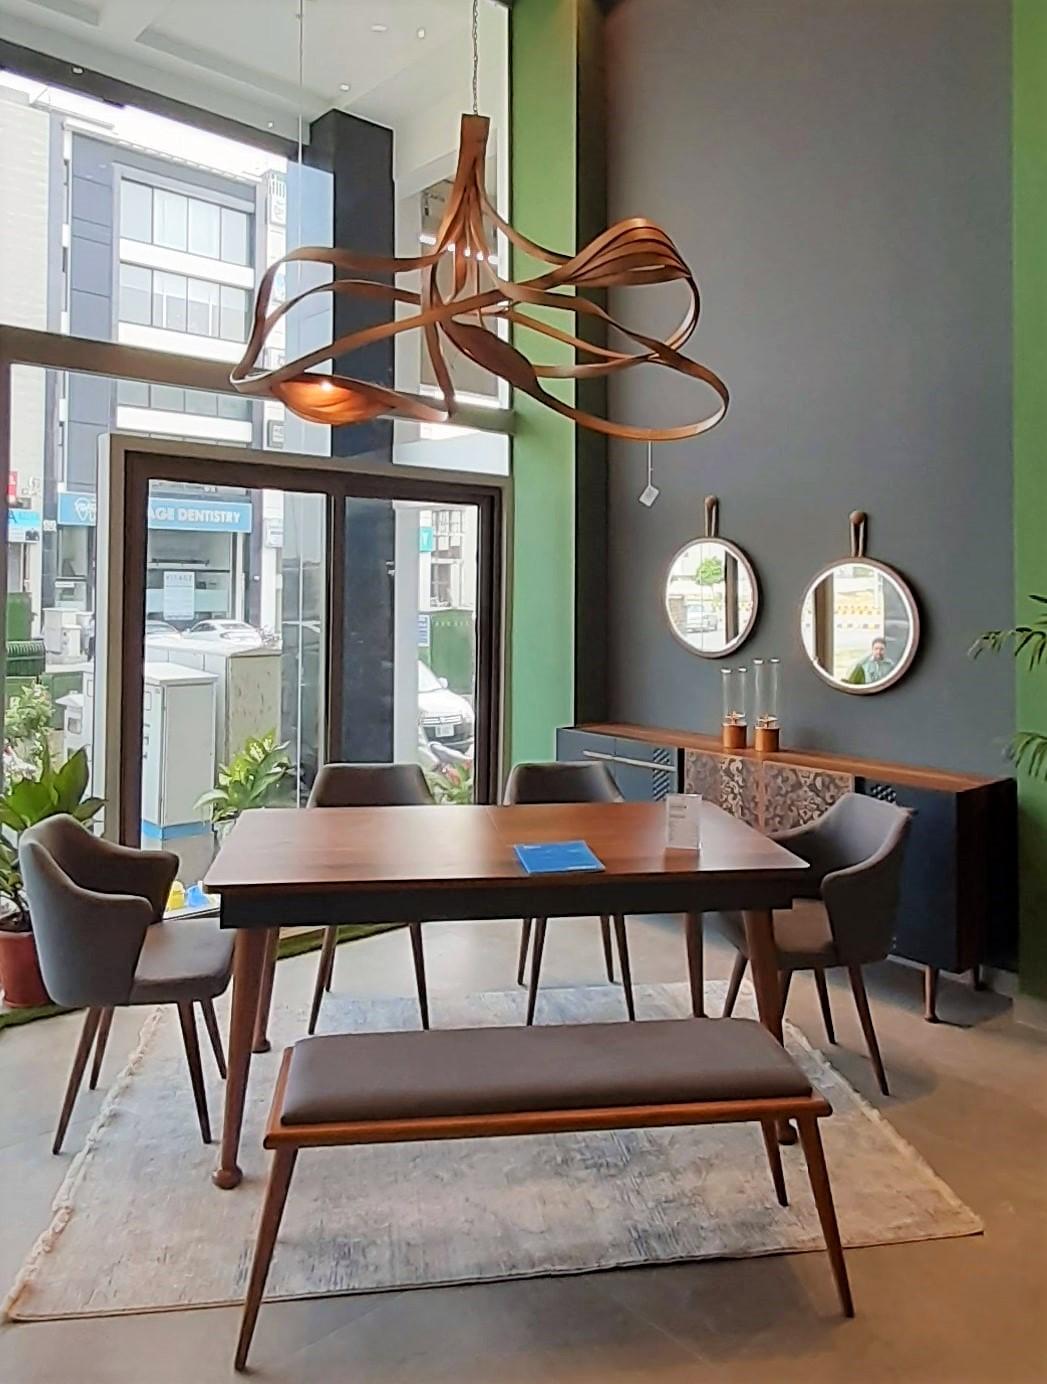 A chandelier made in solid ashwood using wood bending techniques. The piece is a complex design, giving it a varying look from each angle. Three-light are placed in a wooden cocoon-like structure creating a distinct lighting ambiance. The natural